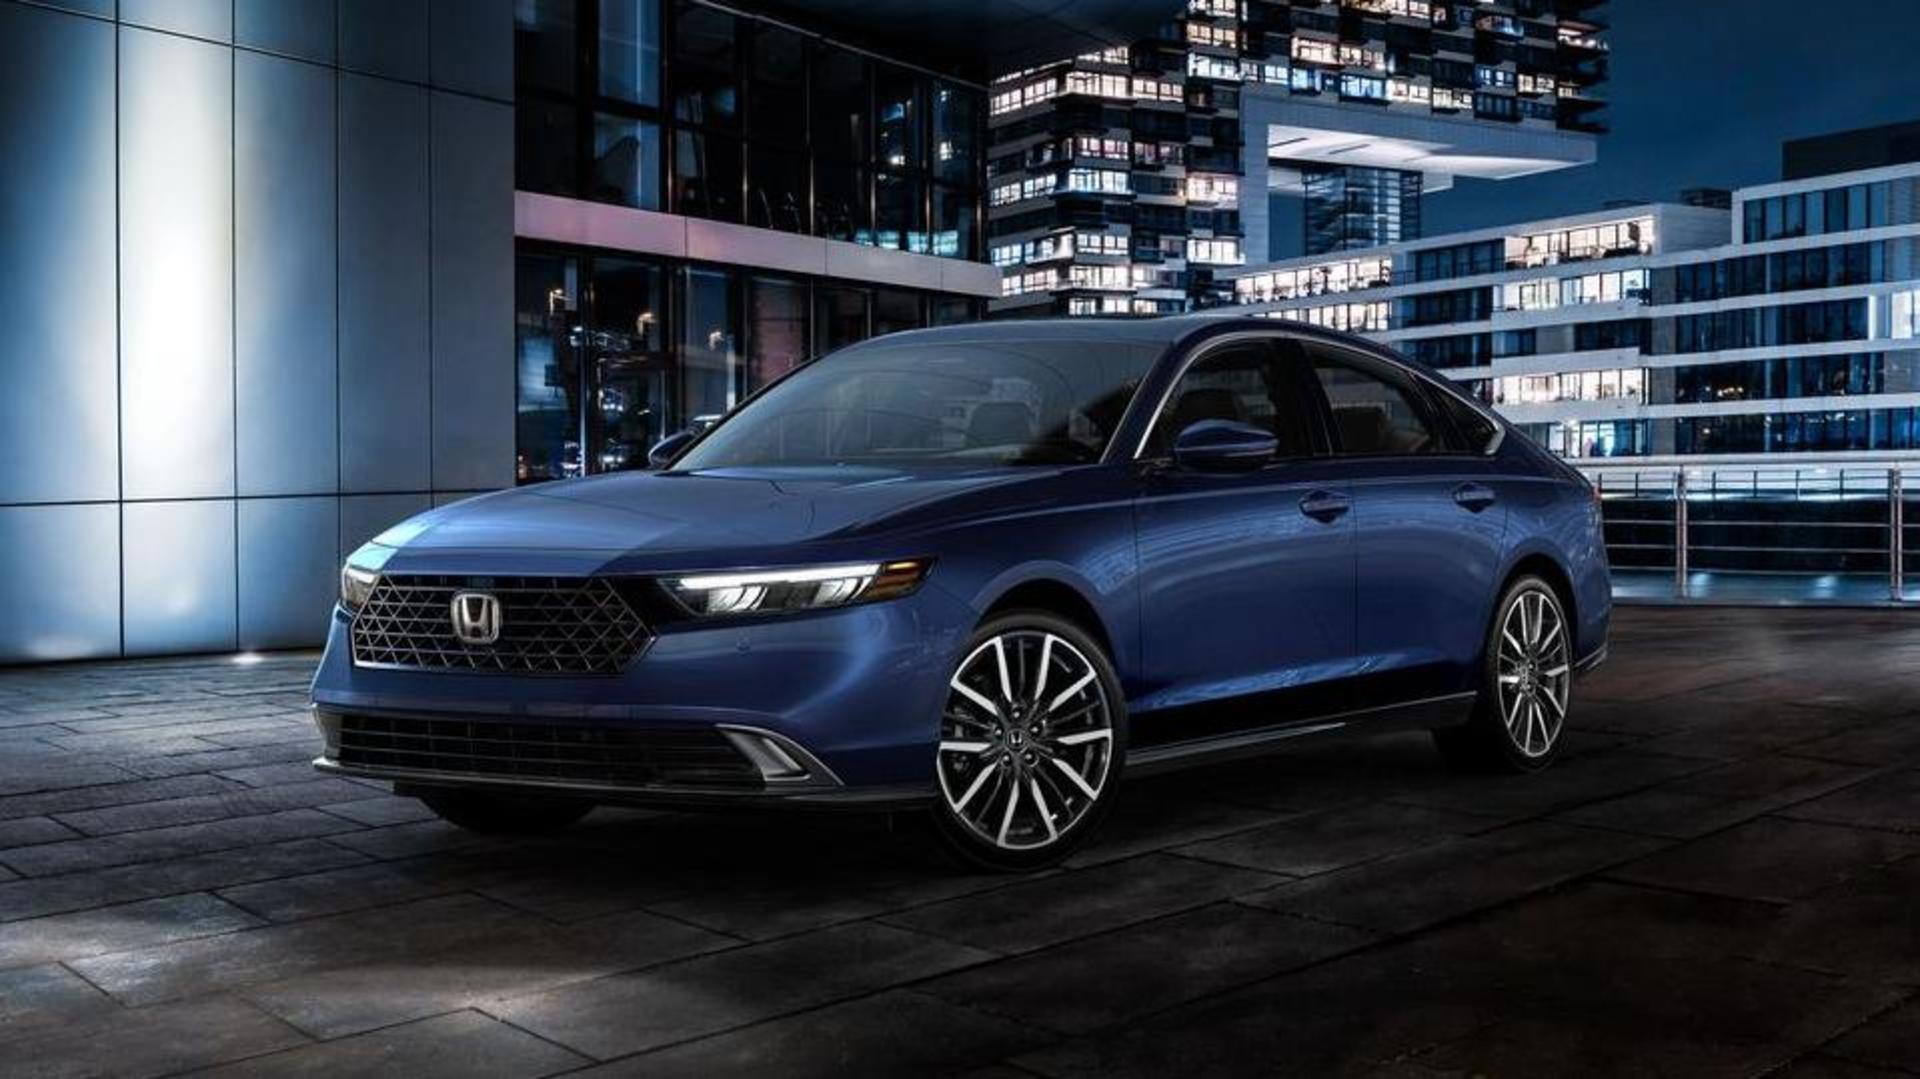 2023 Honda Accord revealed with new styling and hybrid powertrain